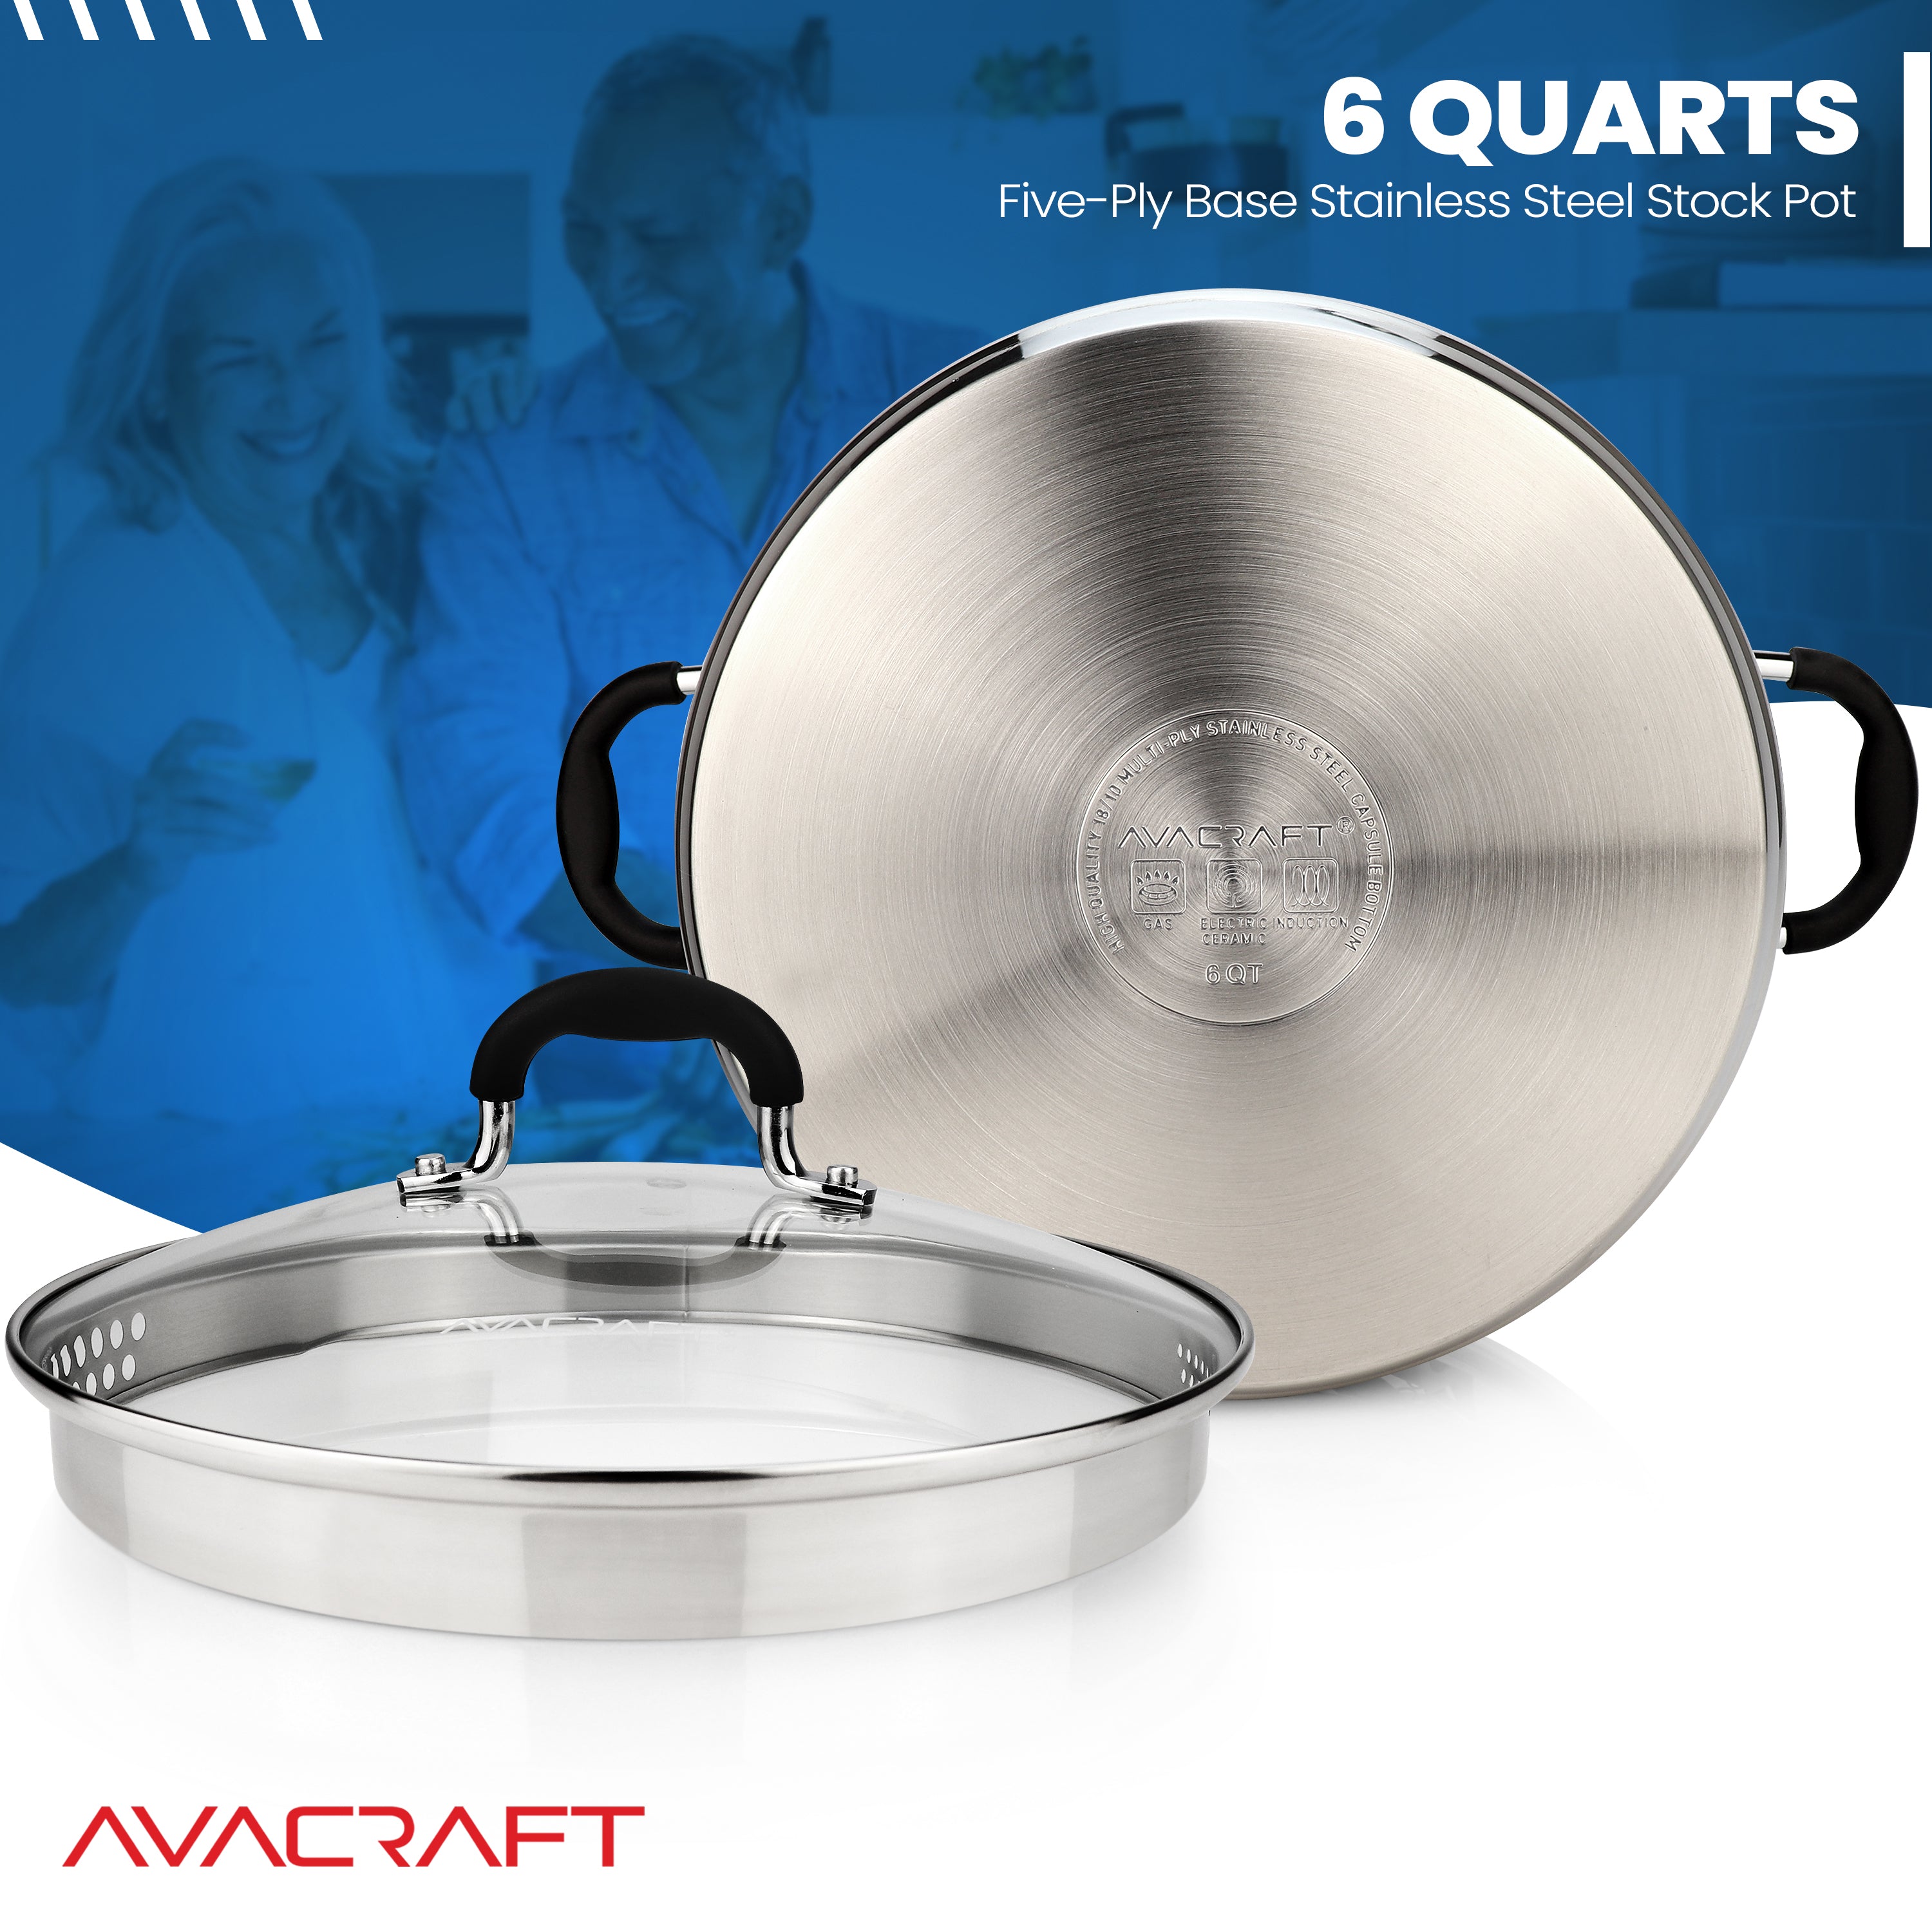 AVACRAFT Top Rated Stainless Steel Stockpot with Glass Strainer Lid, 6 Quart Pot, Side Spouts (6QT)